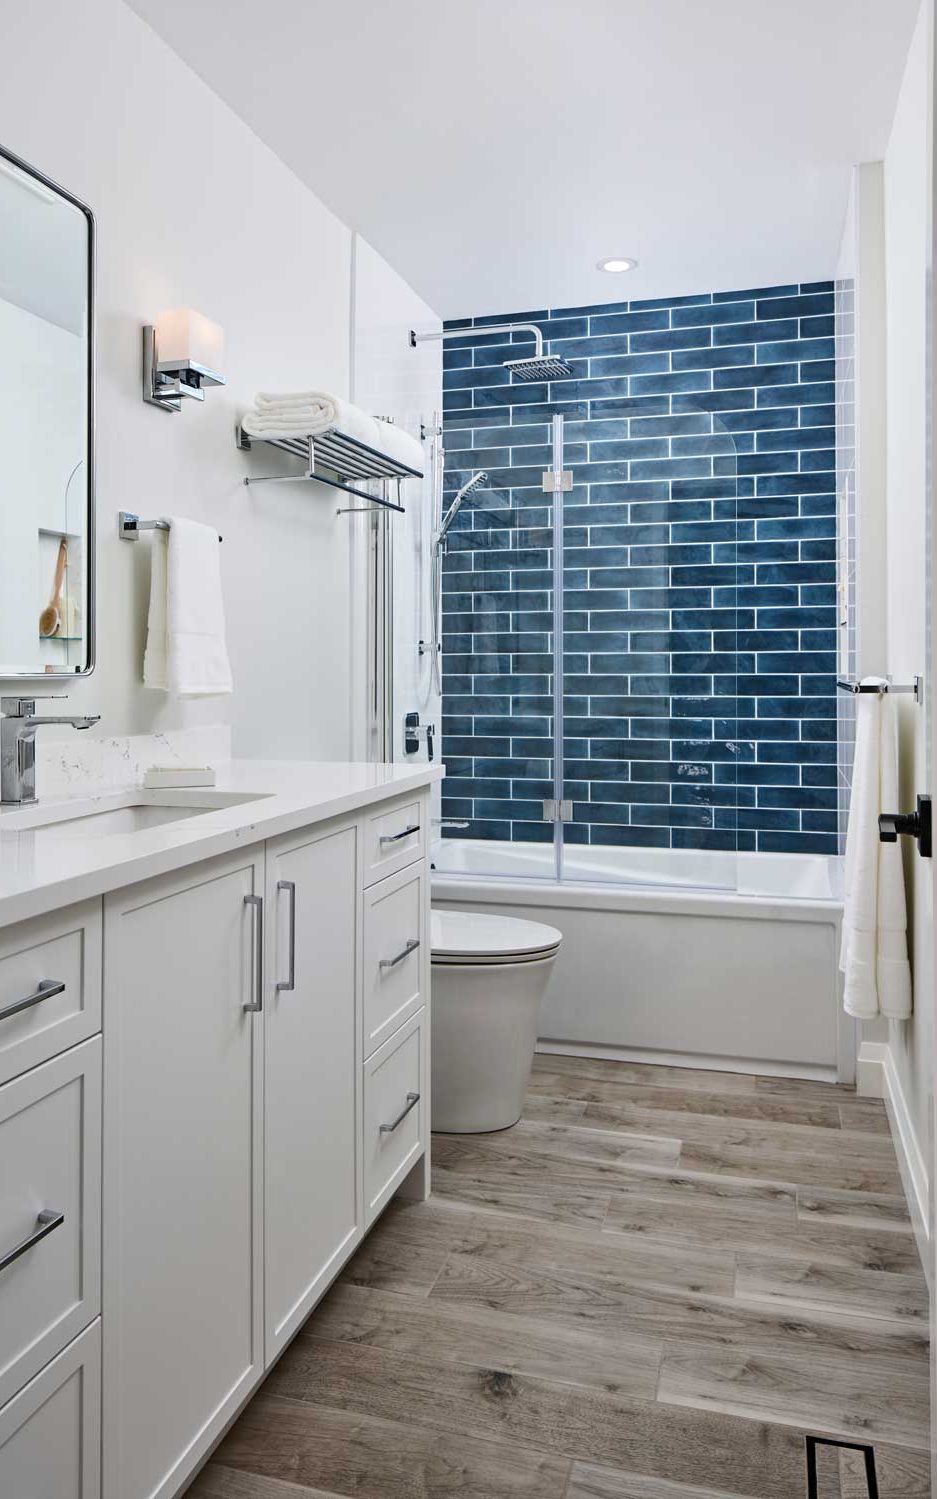 Modern guest bathroom with stunning blue wall tile in the bathtub area and clean white vanity